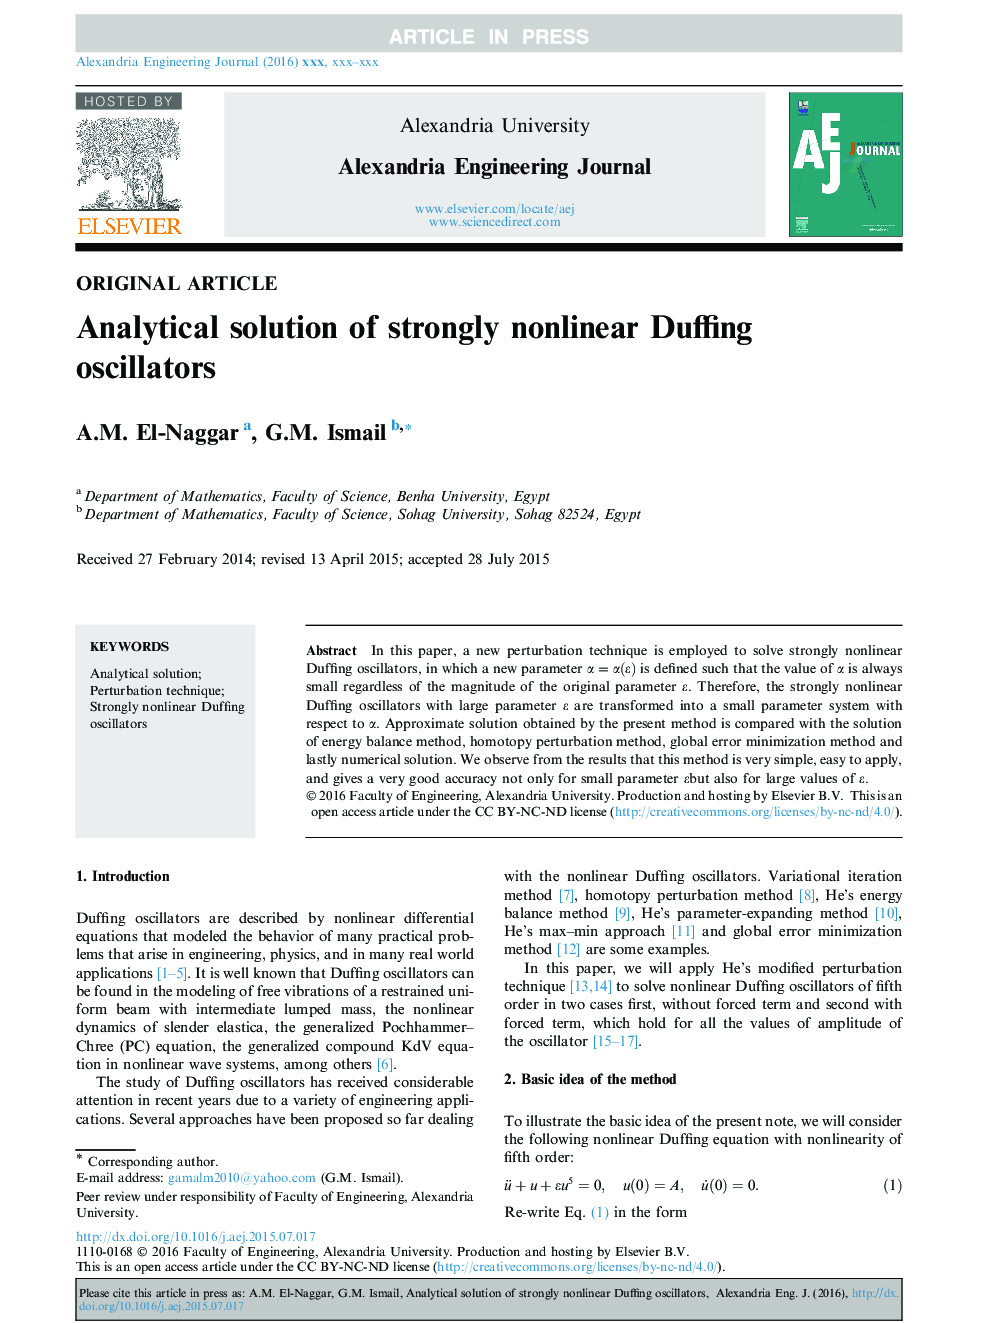 Analytical solution of strongly nonlinear Duffing oscillators